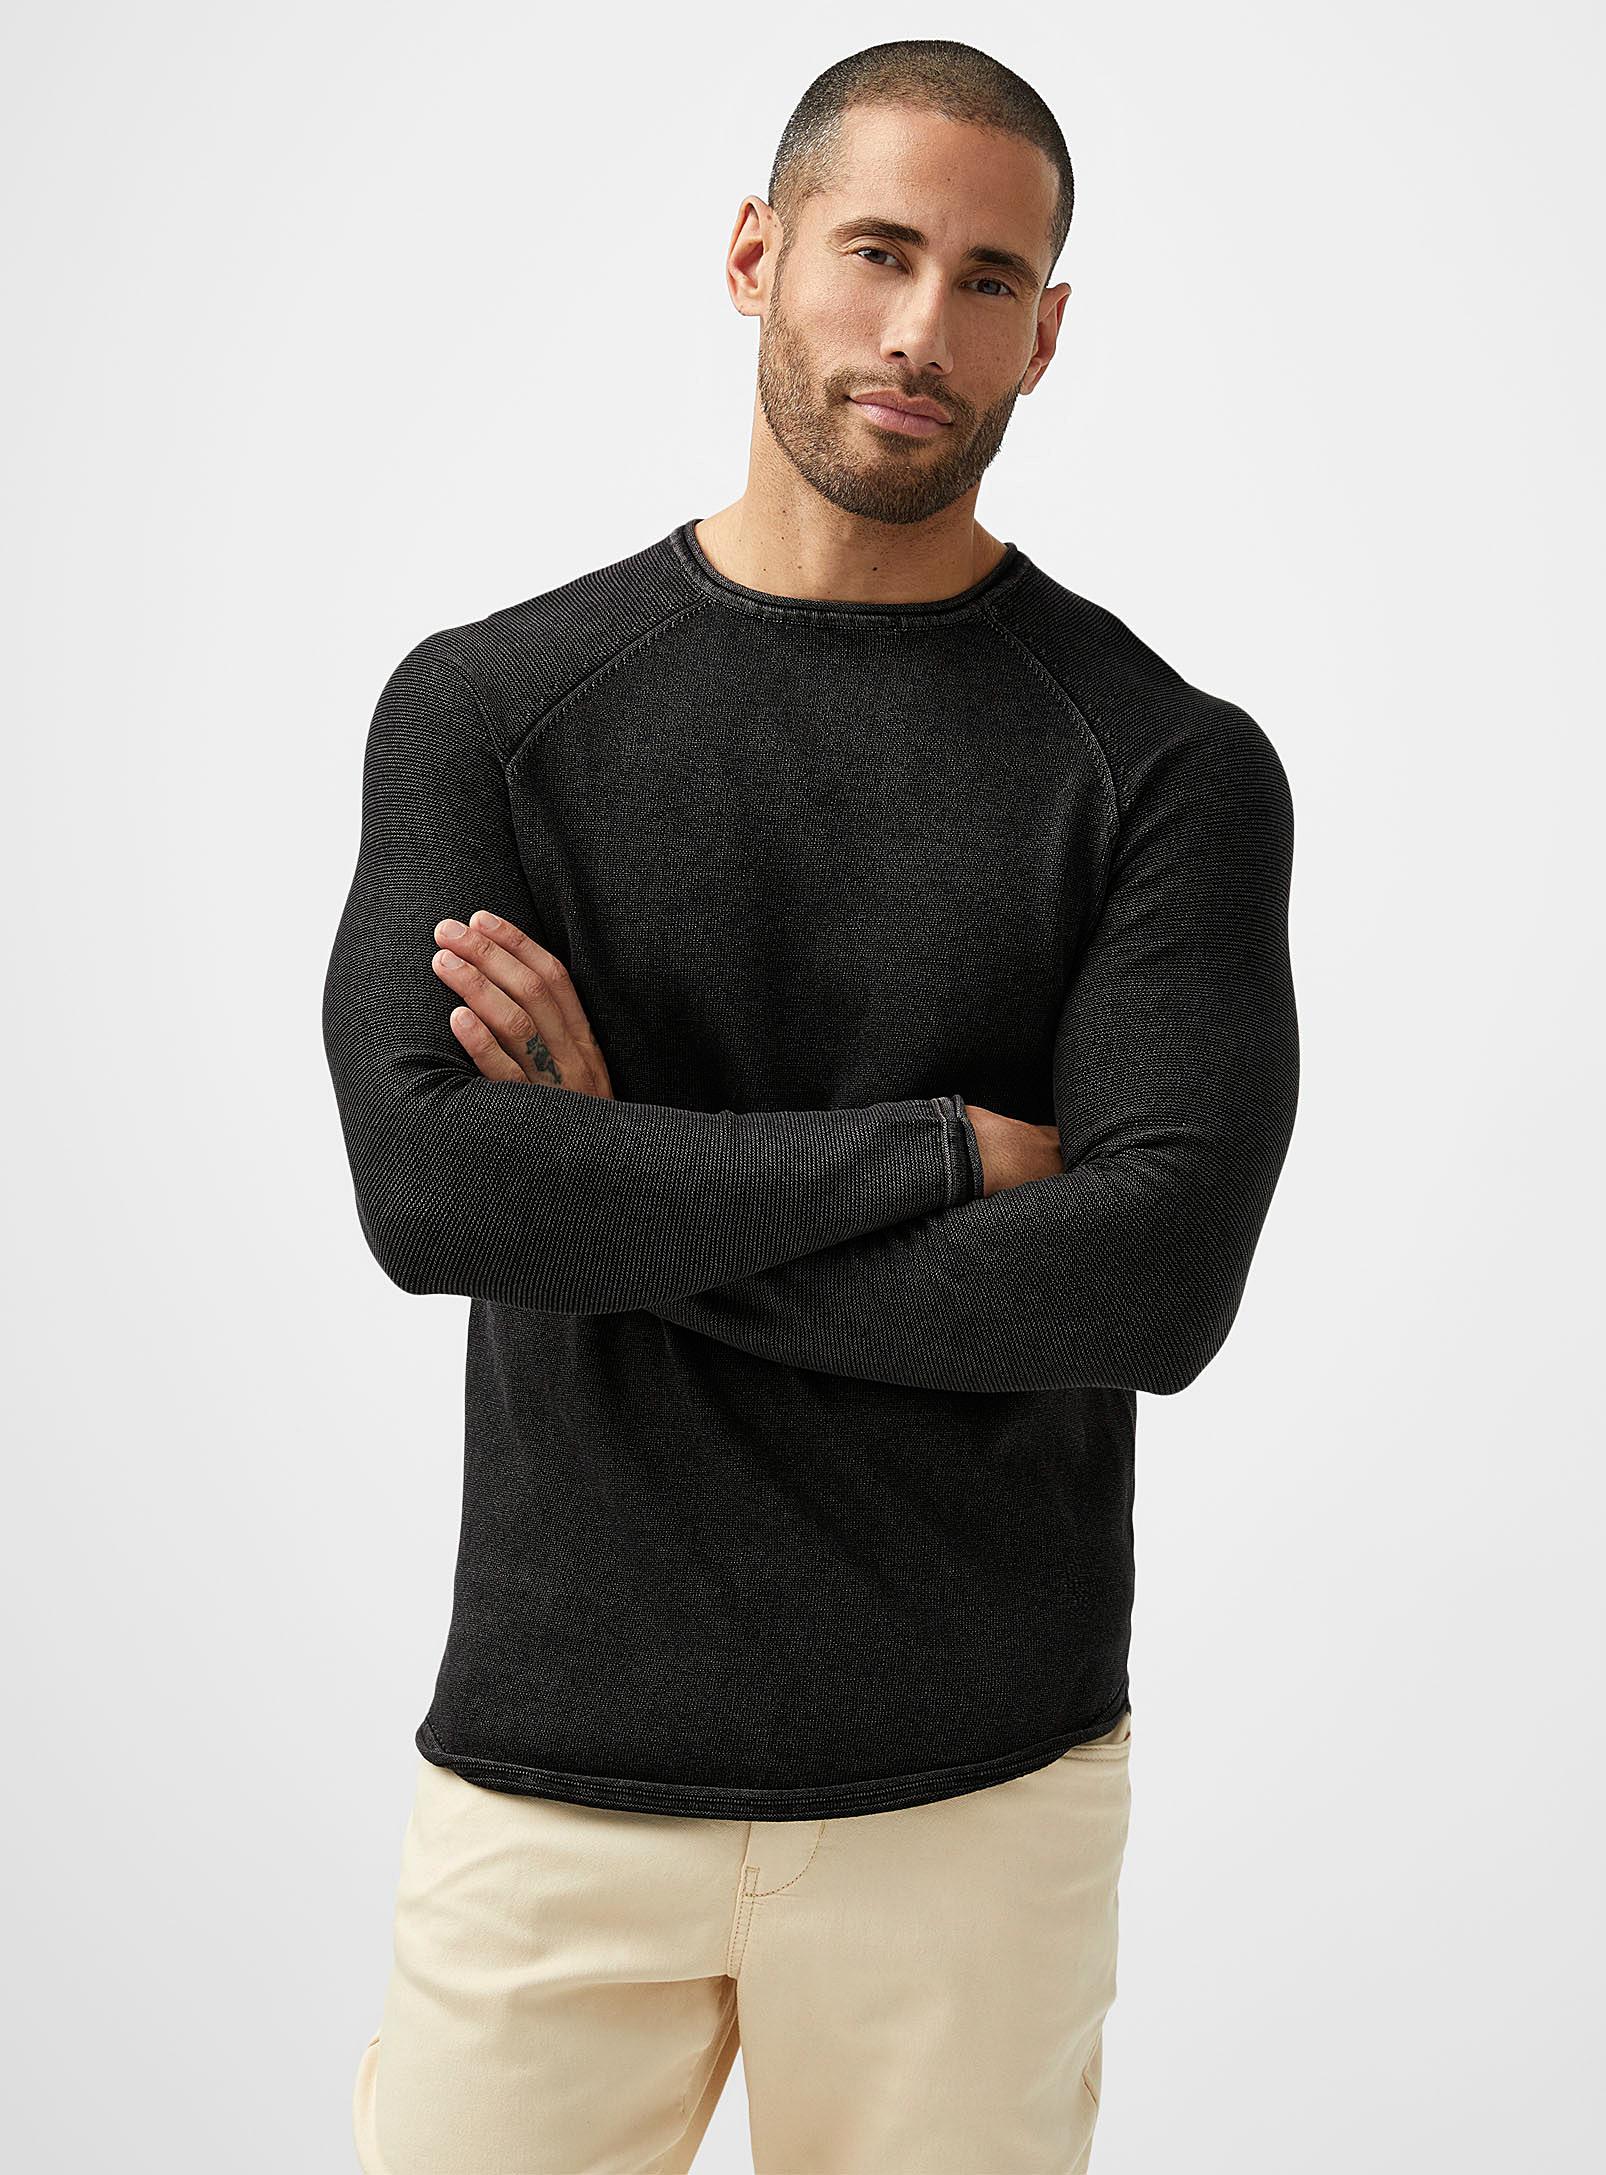 Only & Sons Faded Knit Raglan Sweater in Black for Men - Lyst